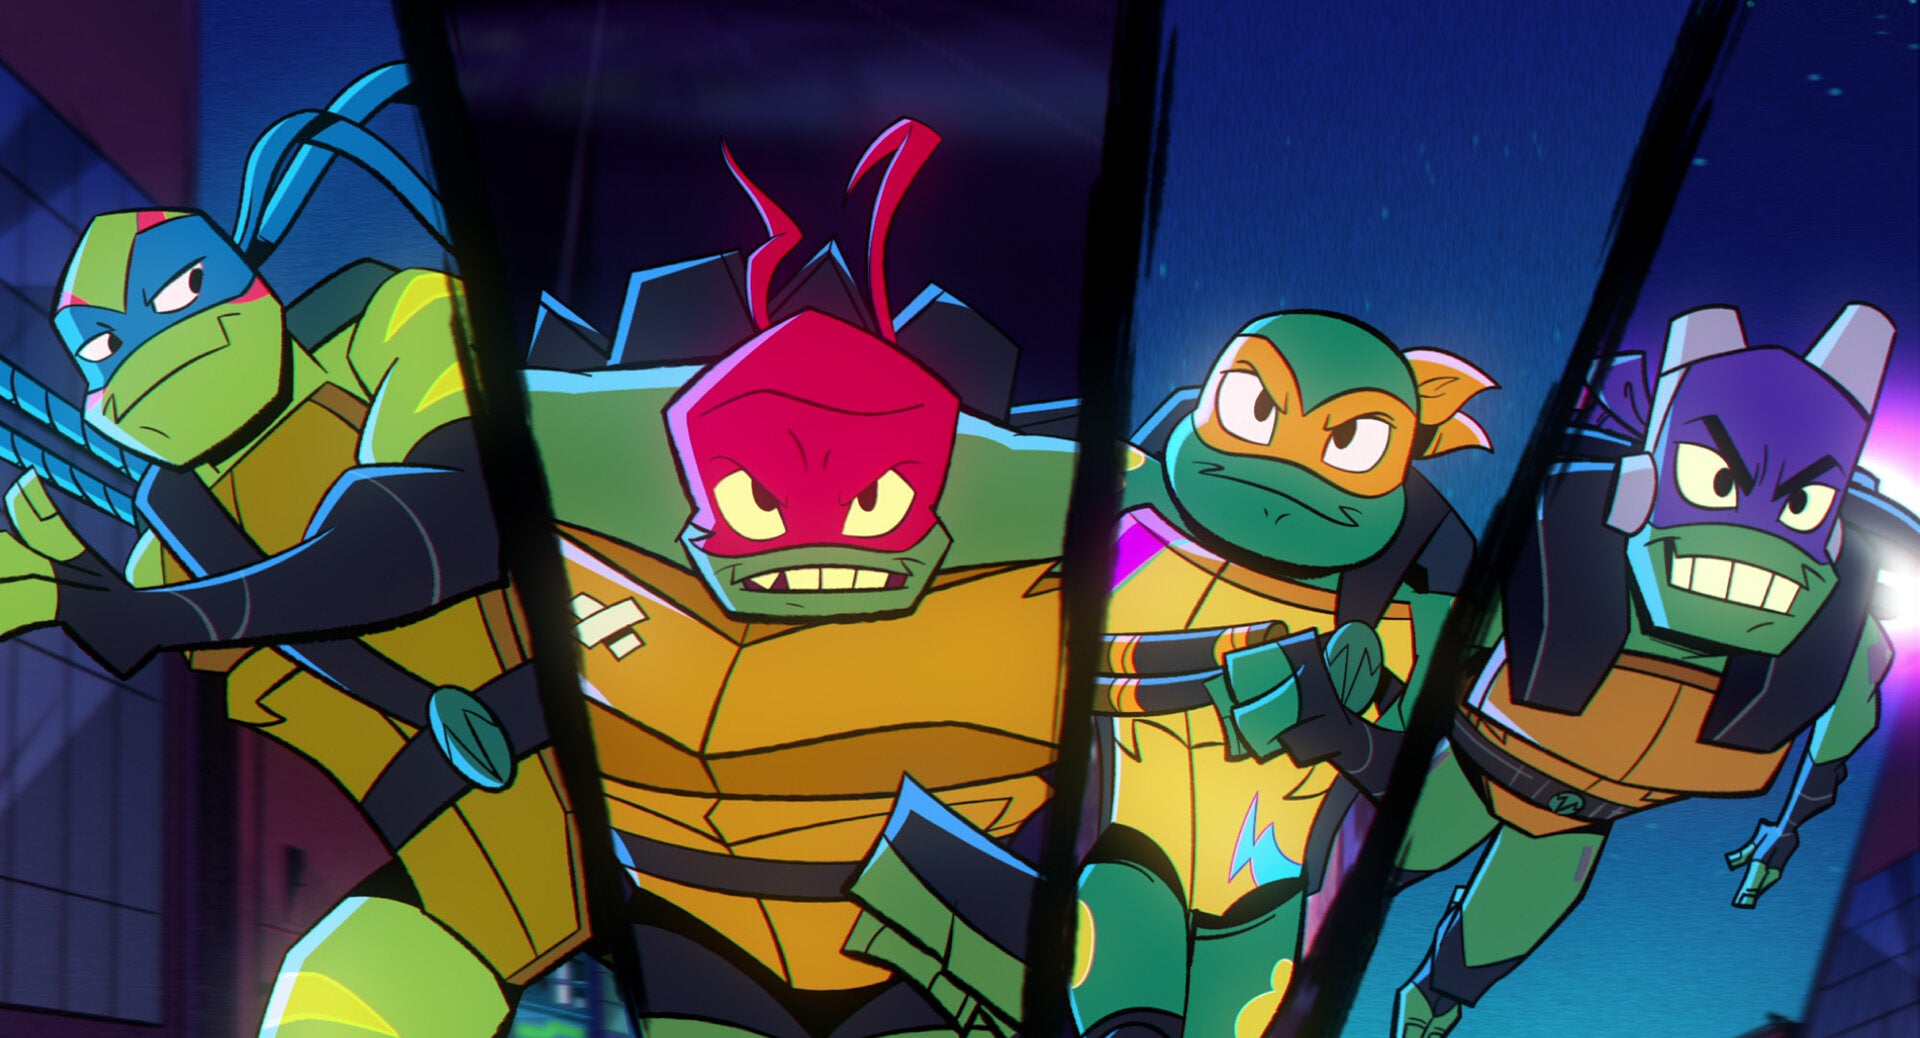 Ascent Of The TMNT's Past And Future Plans Make Me Even More Sad The Show Is Over